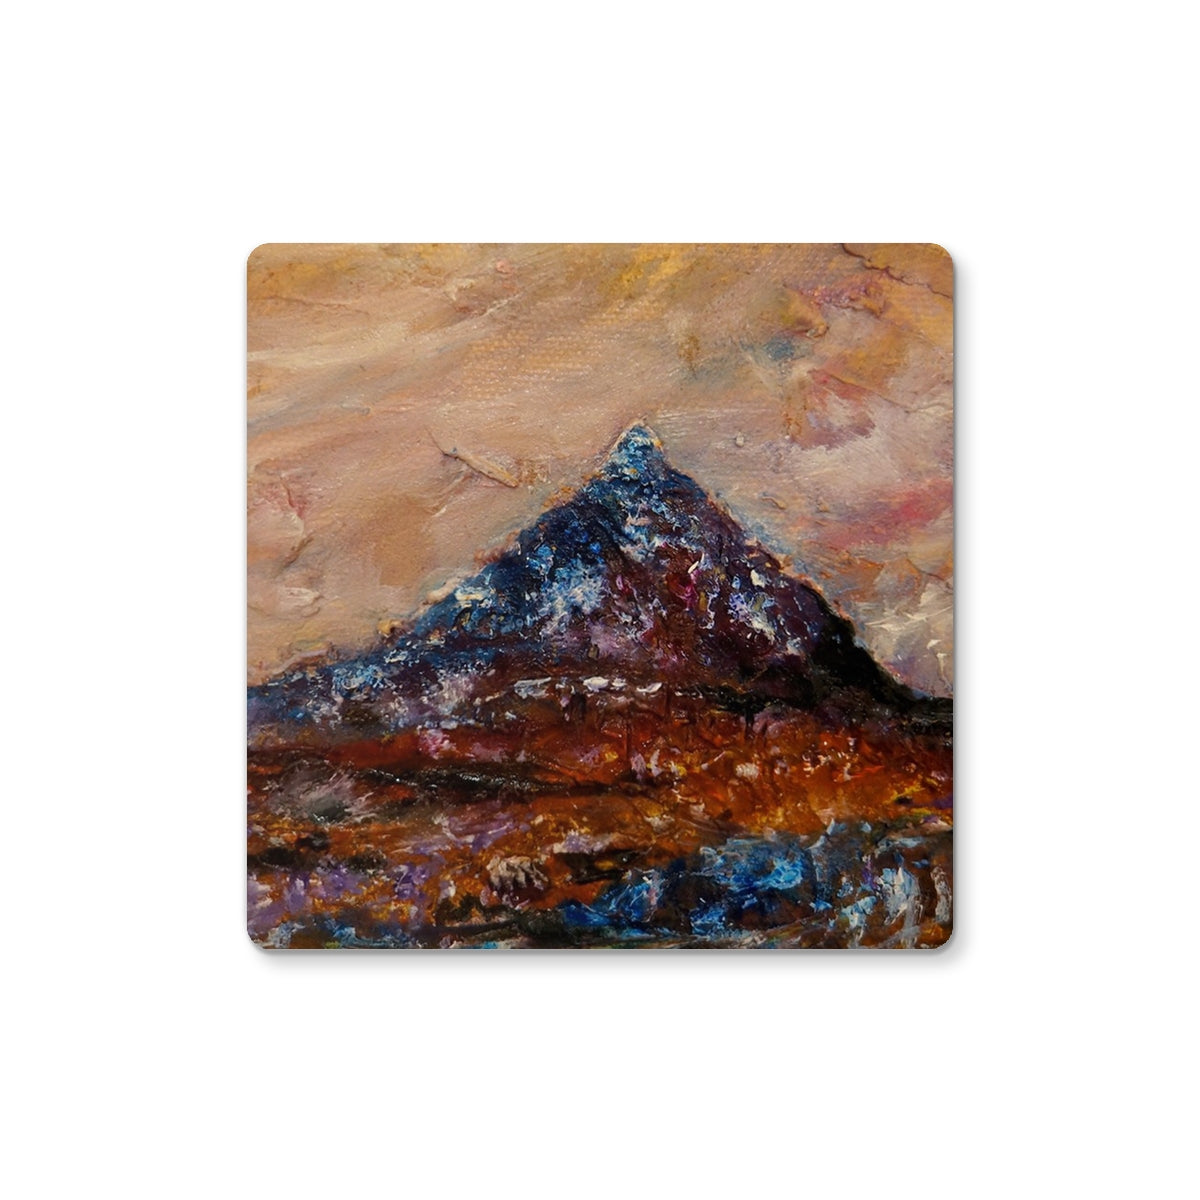 Buachaille Etive Mòr Art Gifts Coaster-Coasters-Glencoe Art Gallery-6 Coasters-Paintings, Prints, Homeware, Art Gifts From Scotland By Scottish Artist Kevin Hunter